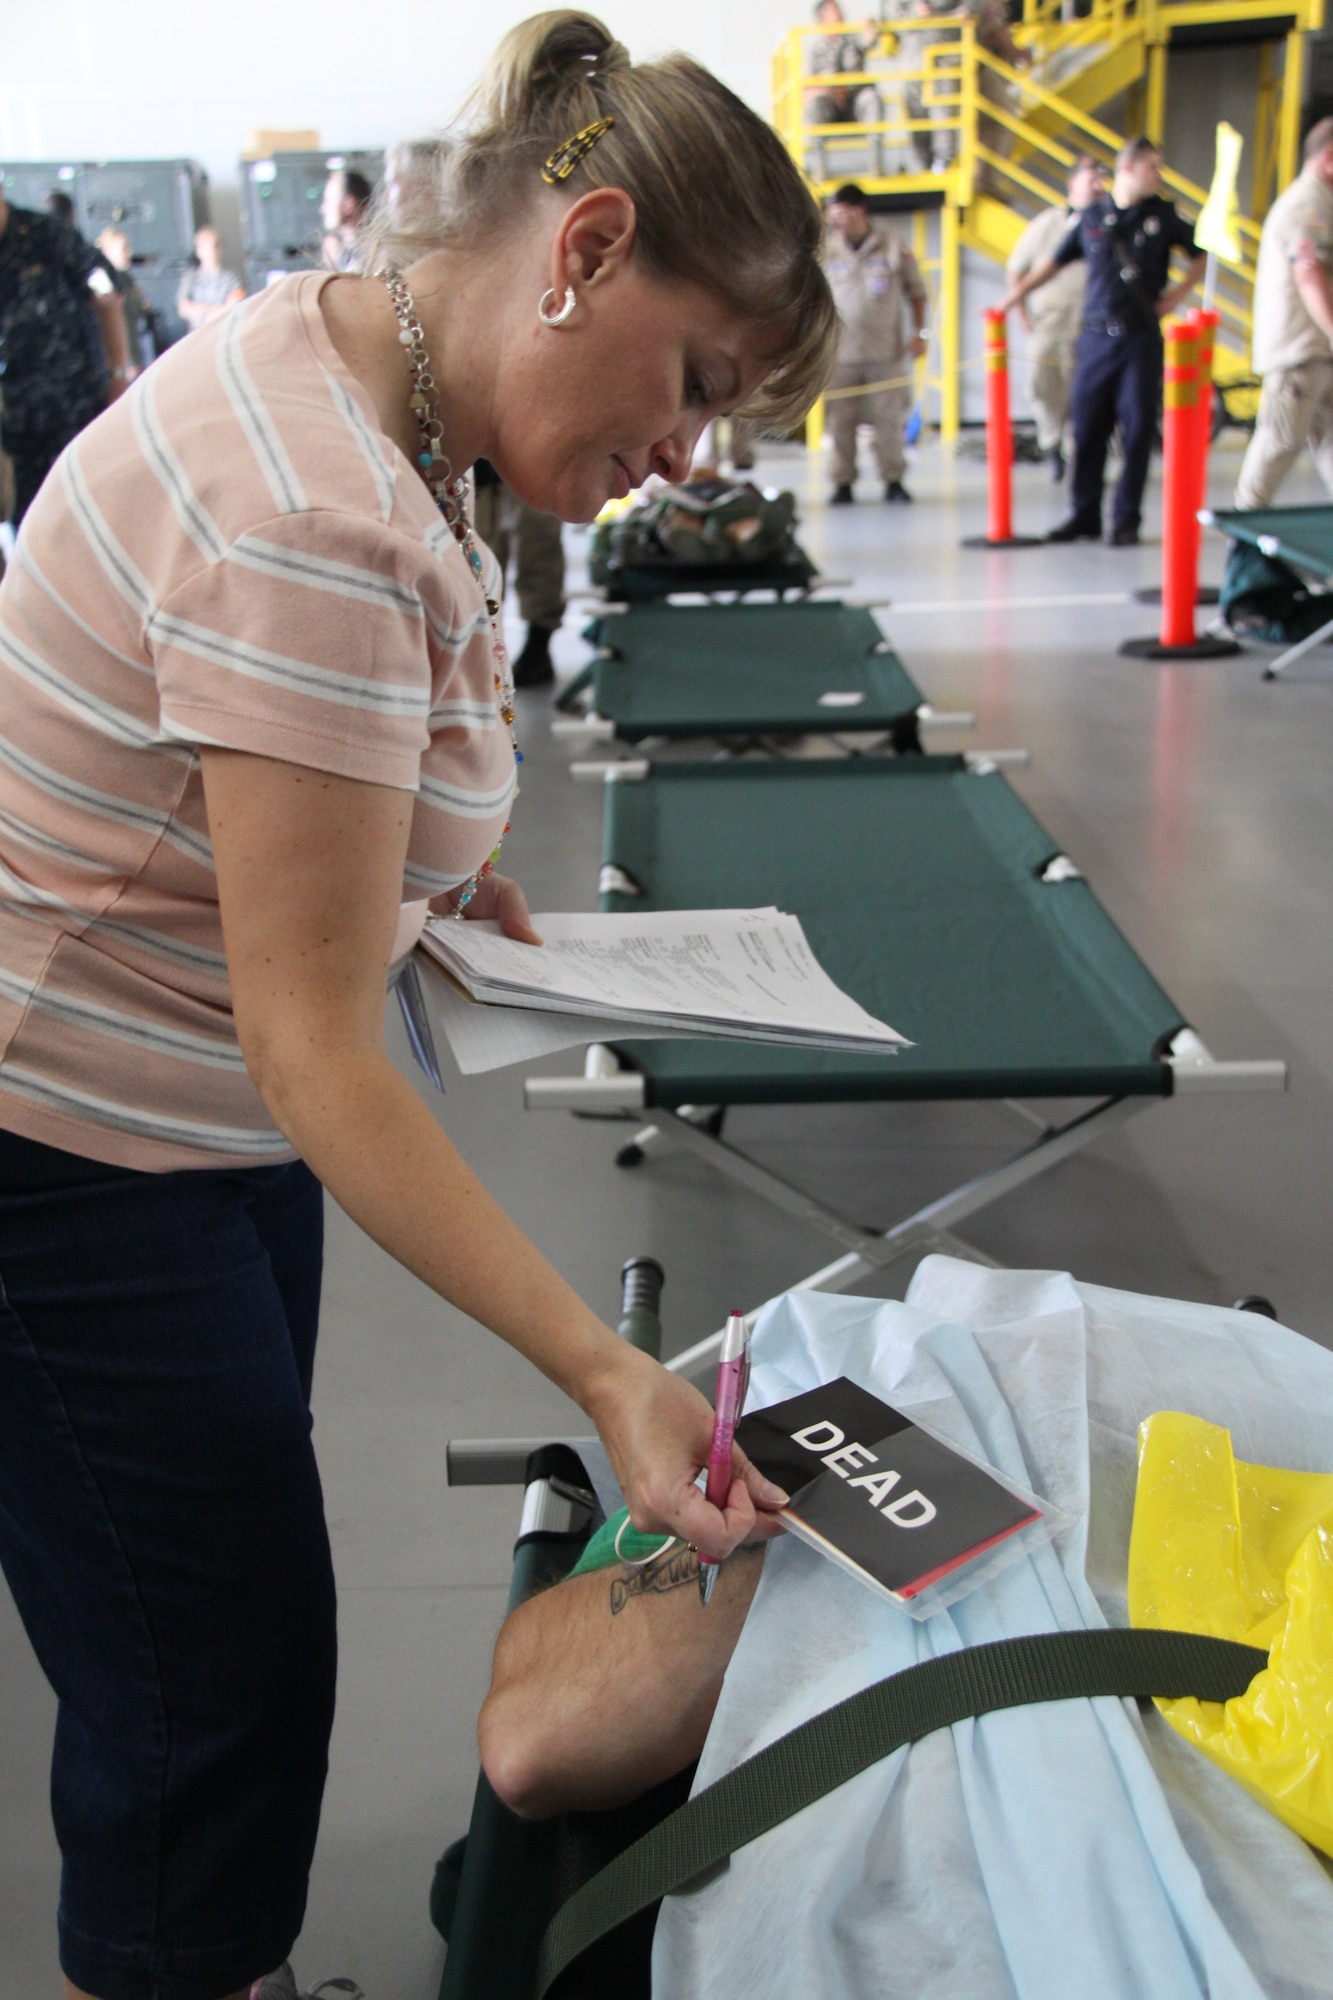 Renee Casey, a 911th Airlift Wing Casualty Augmentation Support Team member, checks the status of a simulated casualty during a National Disaster Medical System Exercise at the Pittsburgh International Airport Air Reserve Station, July 12, 2014. (U.S. Air Force photo by Staff Sgt. Jonathan Hehnly)